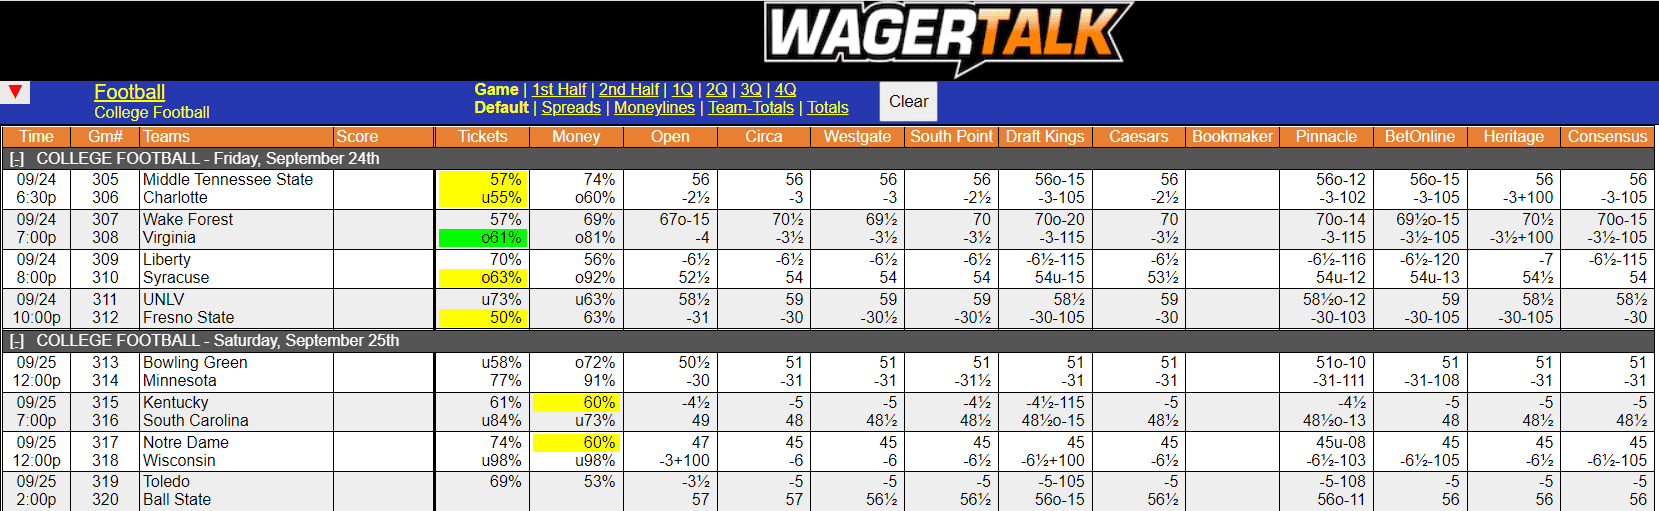 WagerTalk's Live Odds Screen